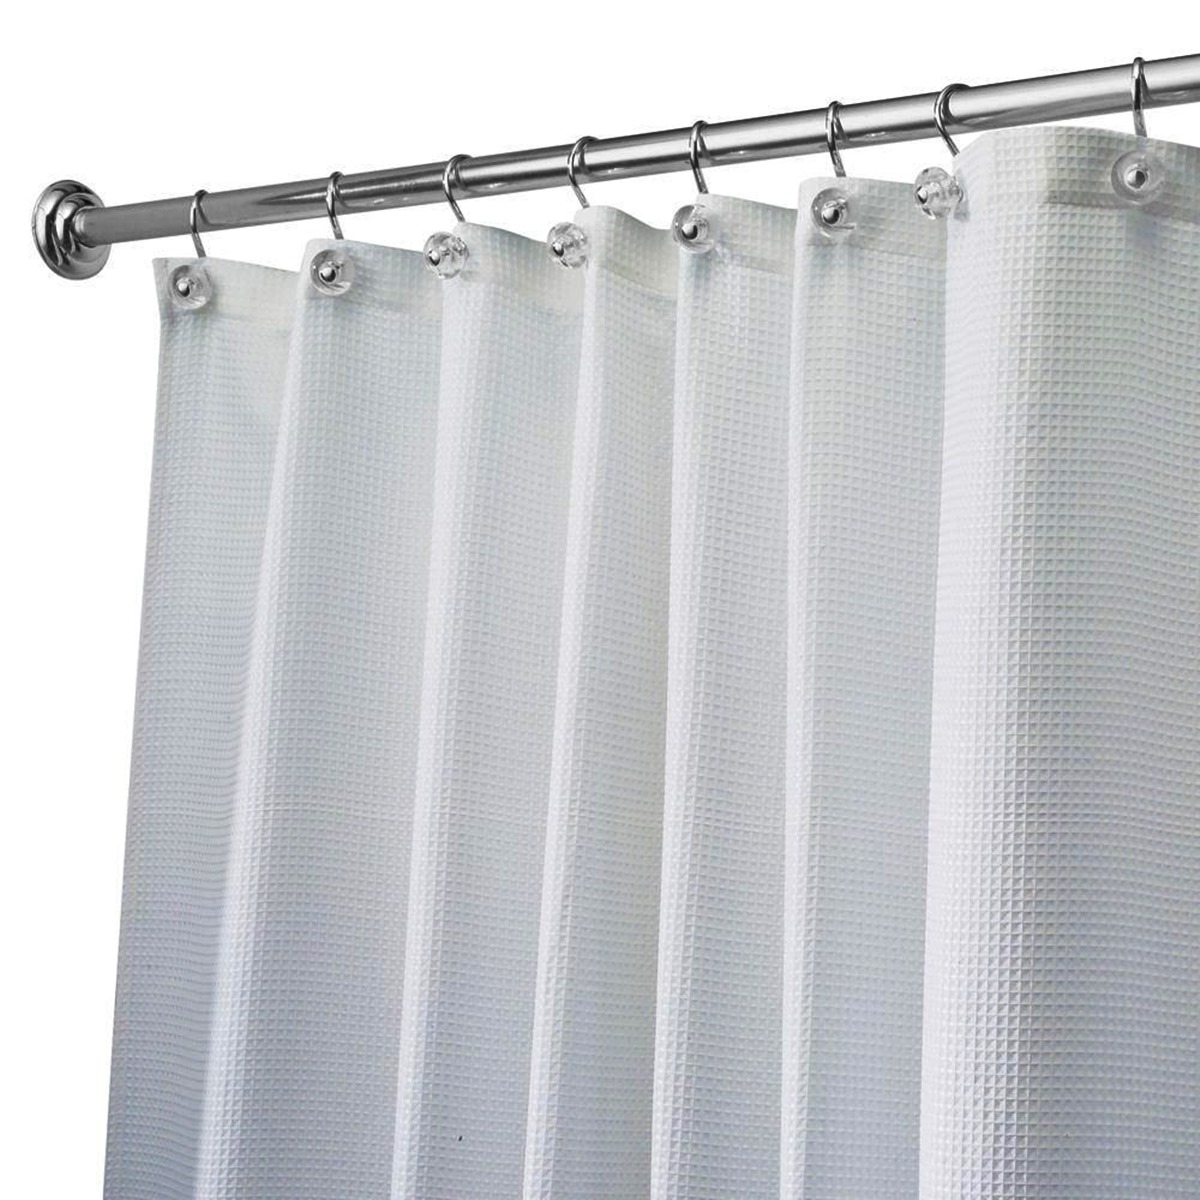 How Long Should A Shower Curtain Be